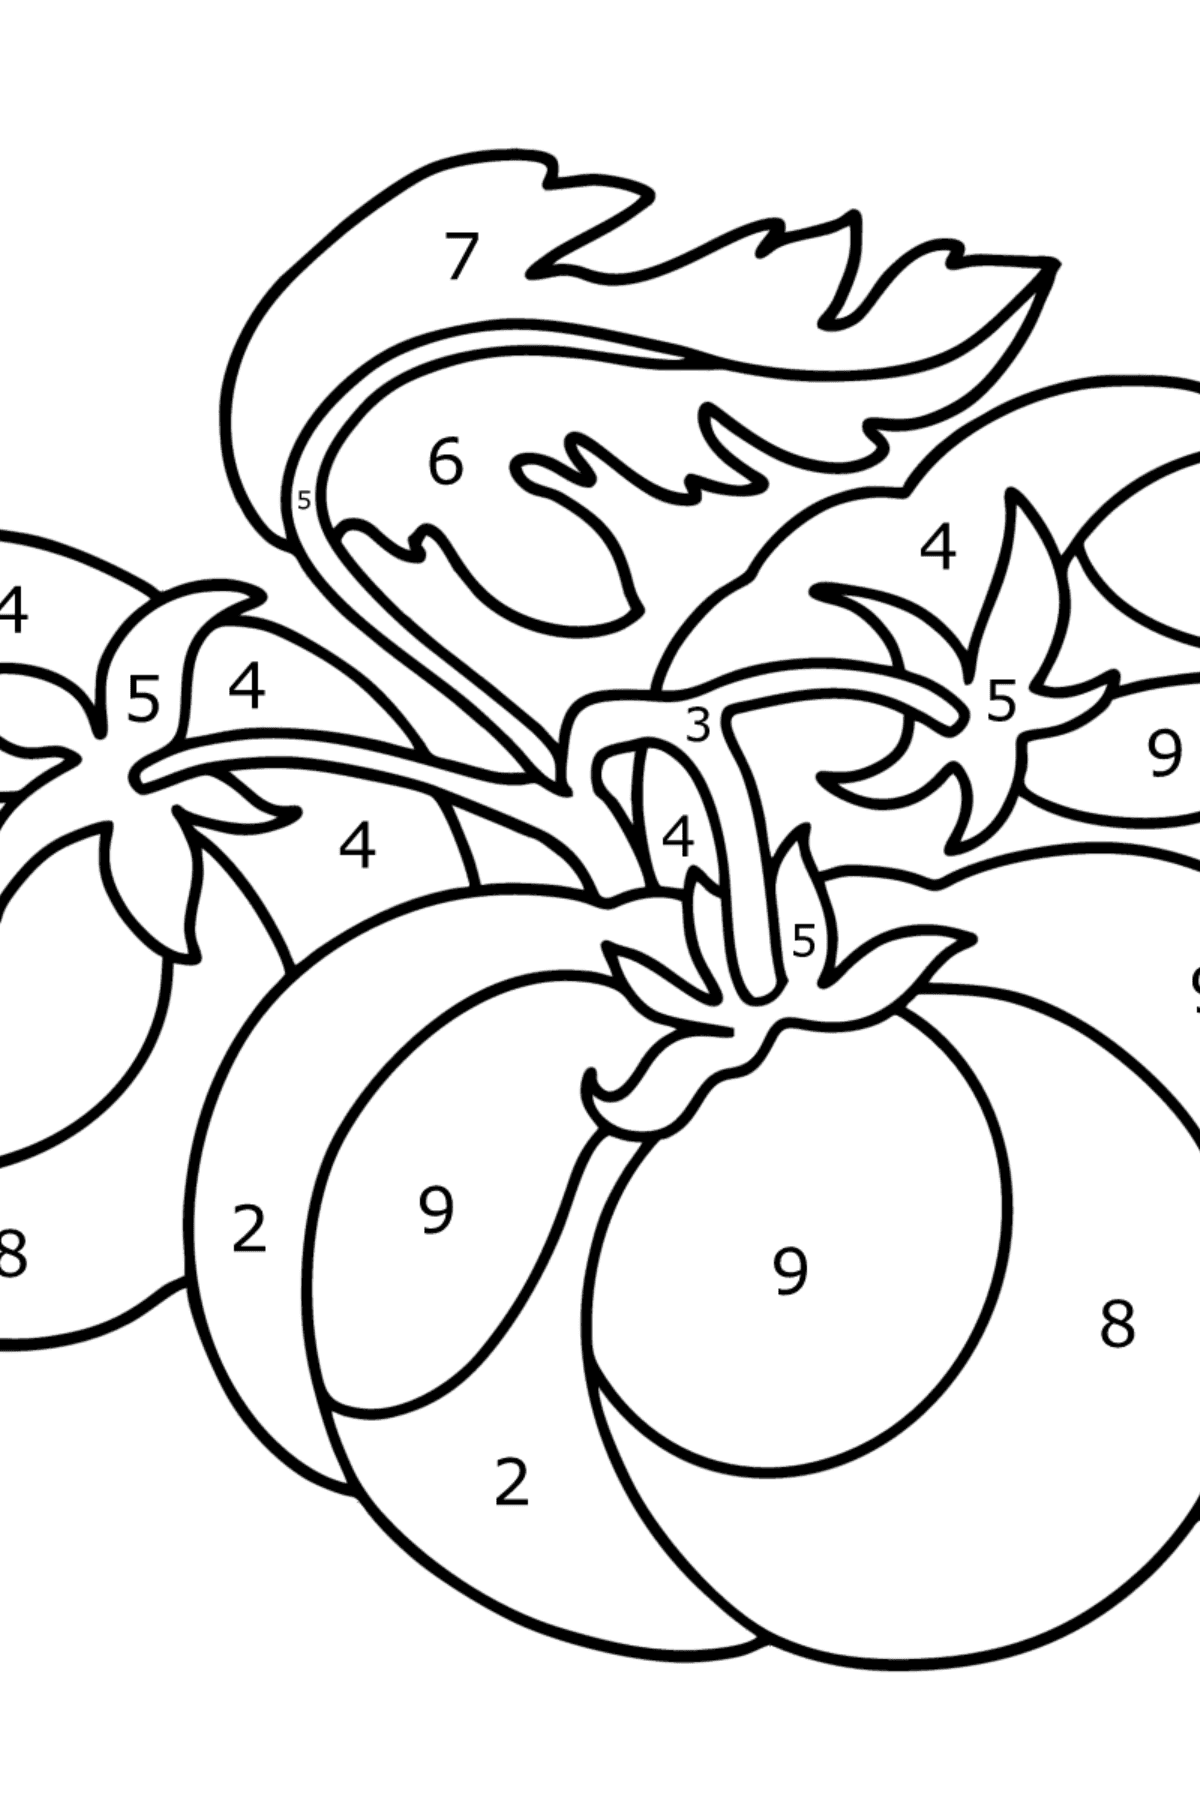 Large tomatoes сoloring page - Coloring by Numbers for Kids